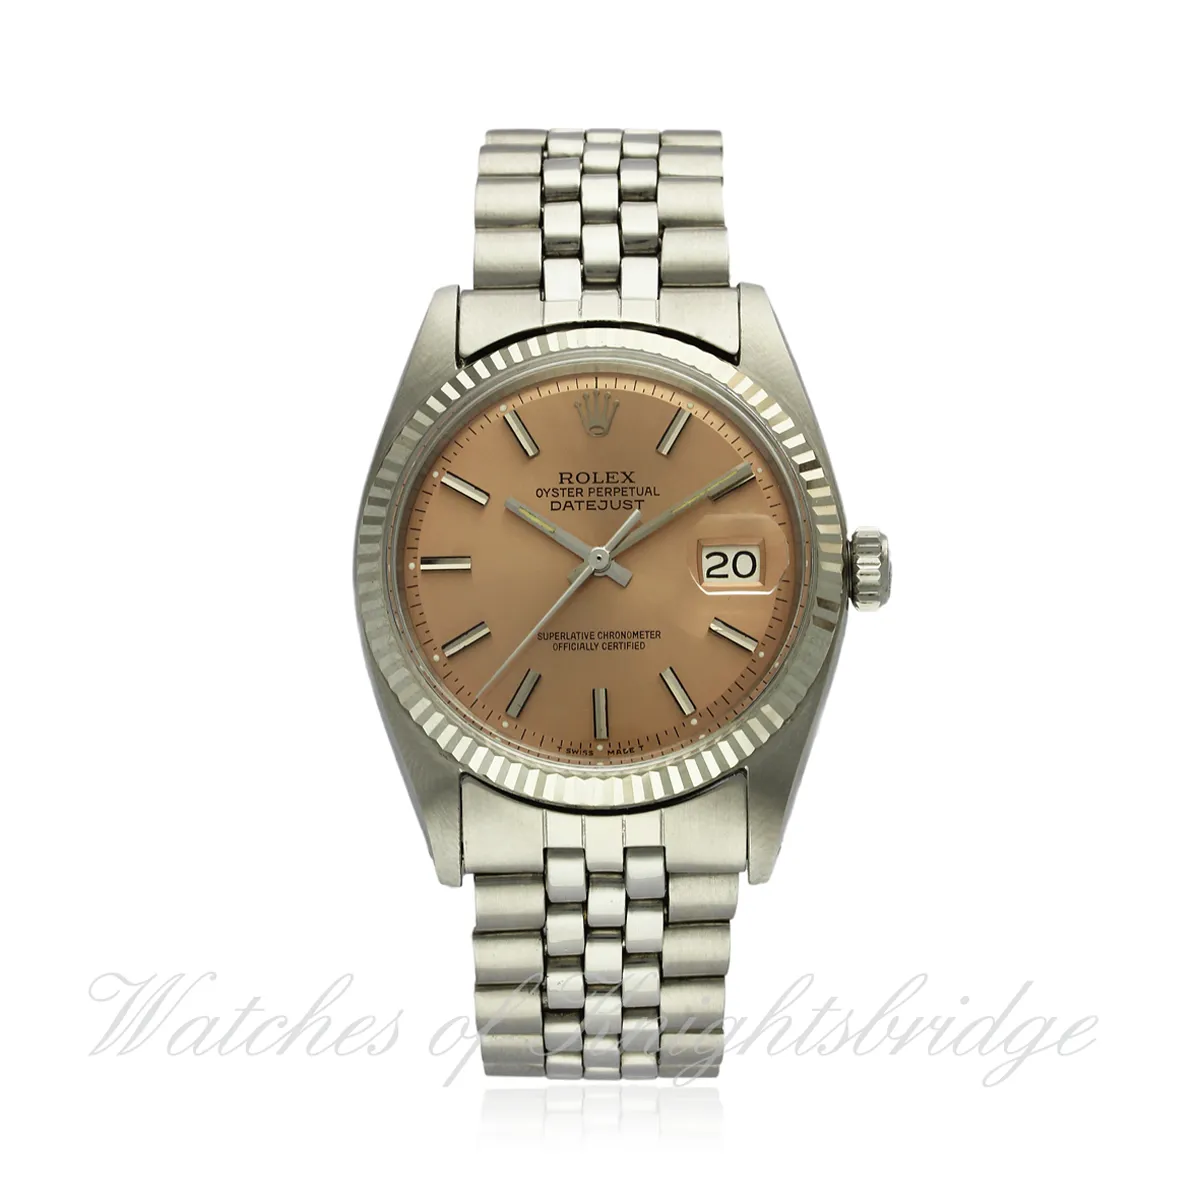 Rolex Datejust 36 1601 36mm Steel and white gold Salmon Pink